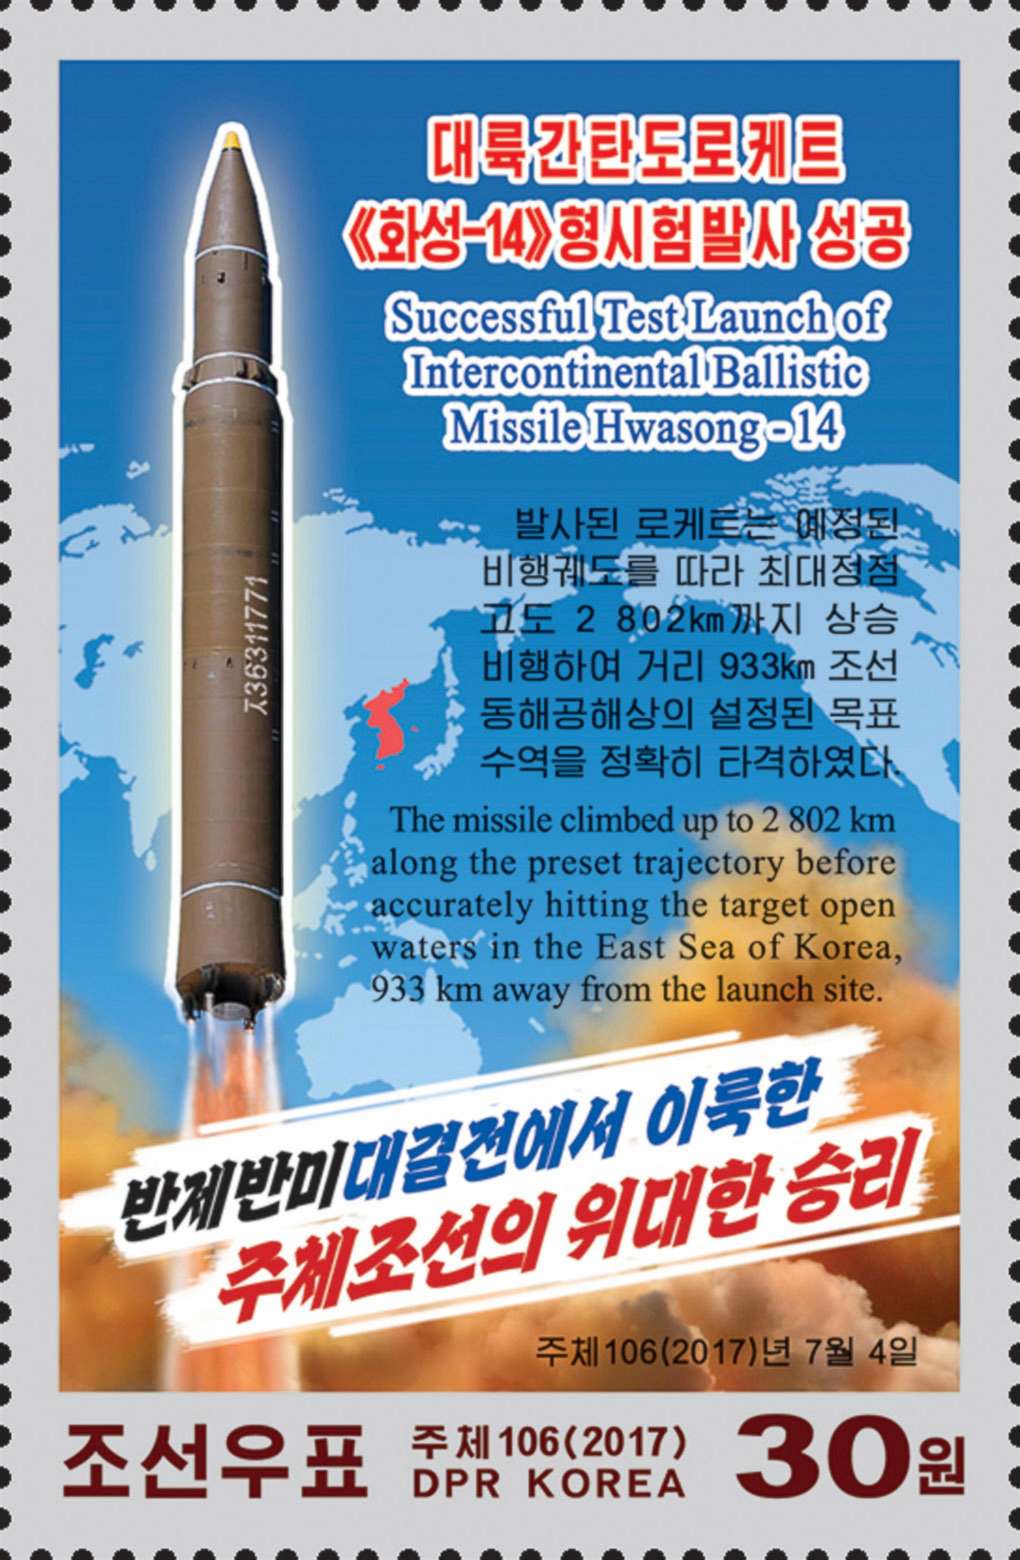 PHOTO: A new stamp issued in commemoration of the successful test launch of the "Hwasong-14" intercontinental ballistic missile is seen in this undated photo released by North Korea's Korean Central News Agency in Pyongyang, Aug. 8, 2017.